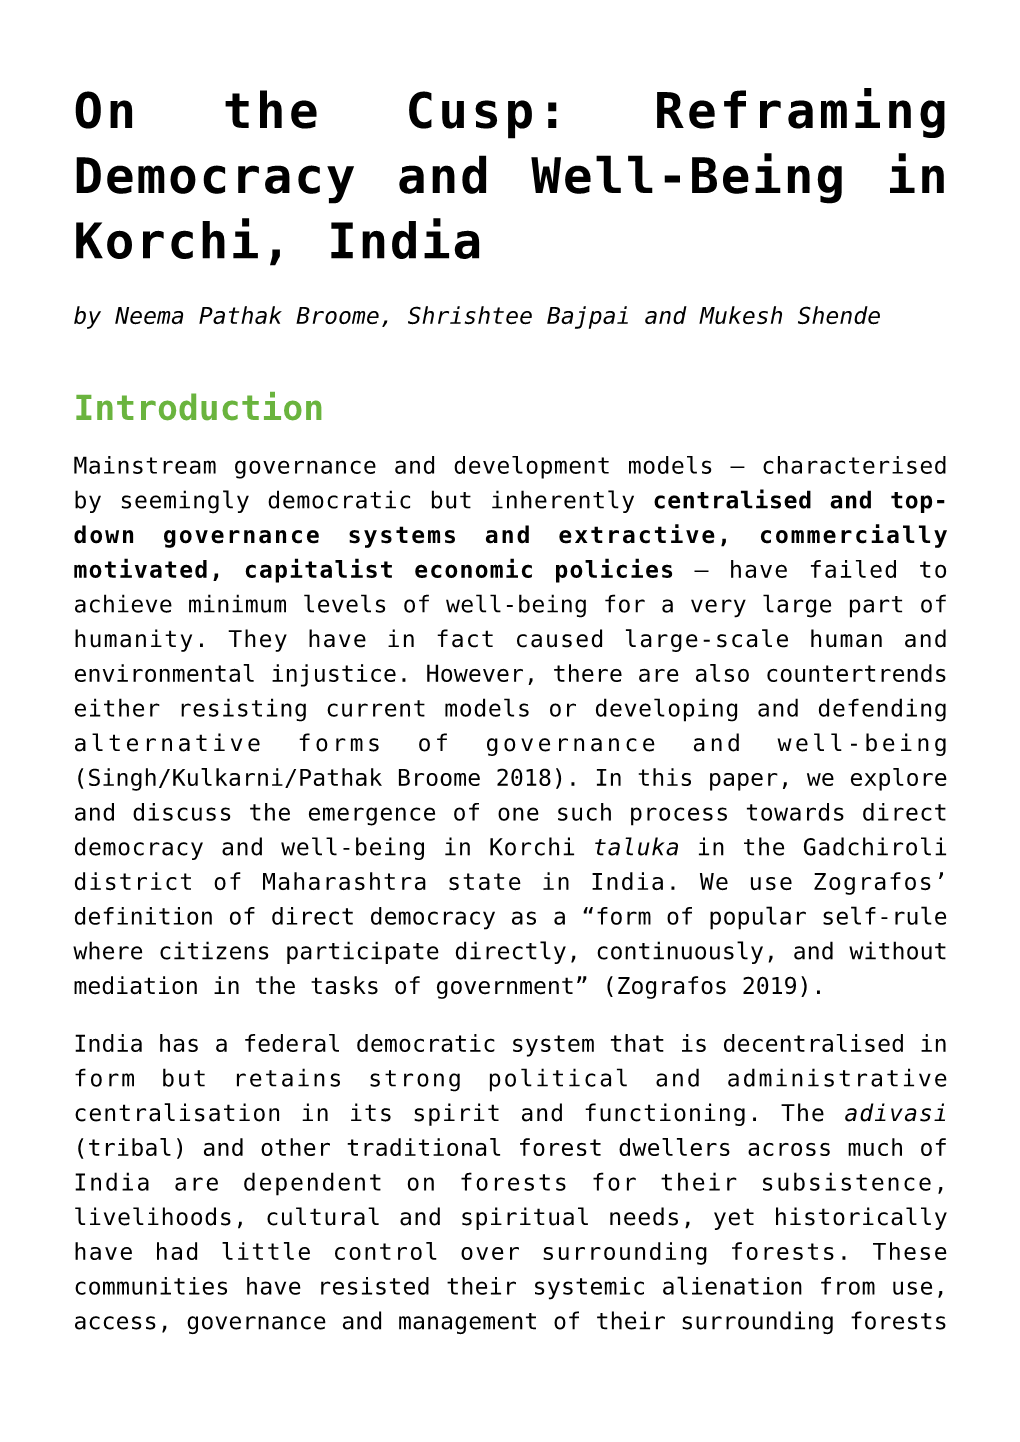 On the Cusp: Reframing Democracy and Well-Being in Korchi, India by Neema Pathak Broome, Shrishtee Bajpai and Mukesh Shende